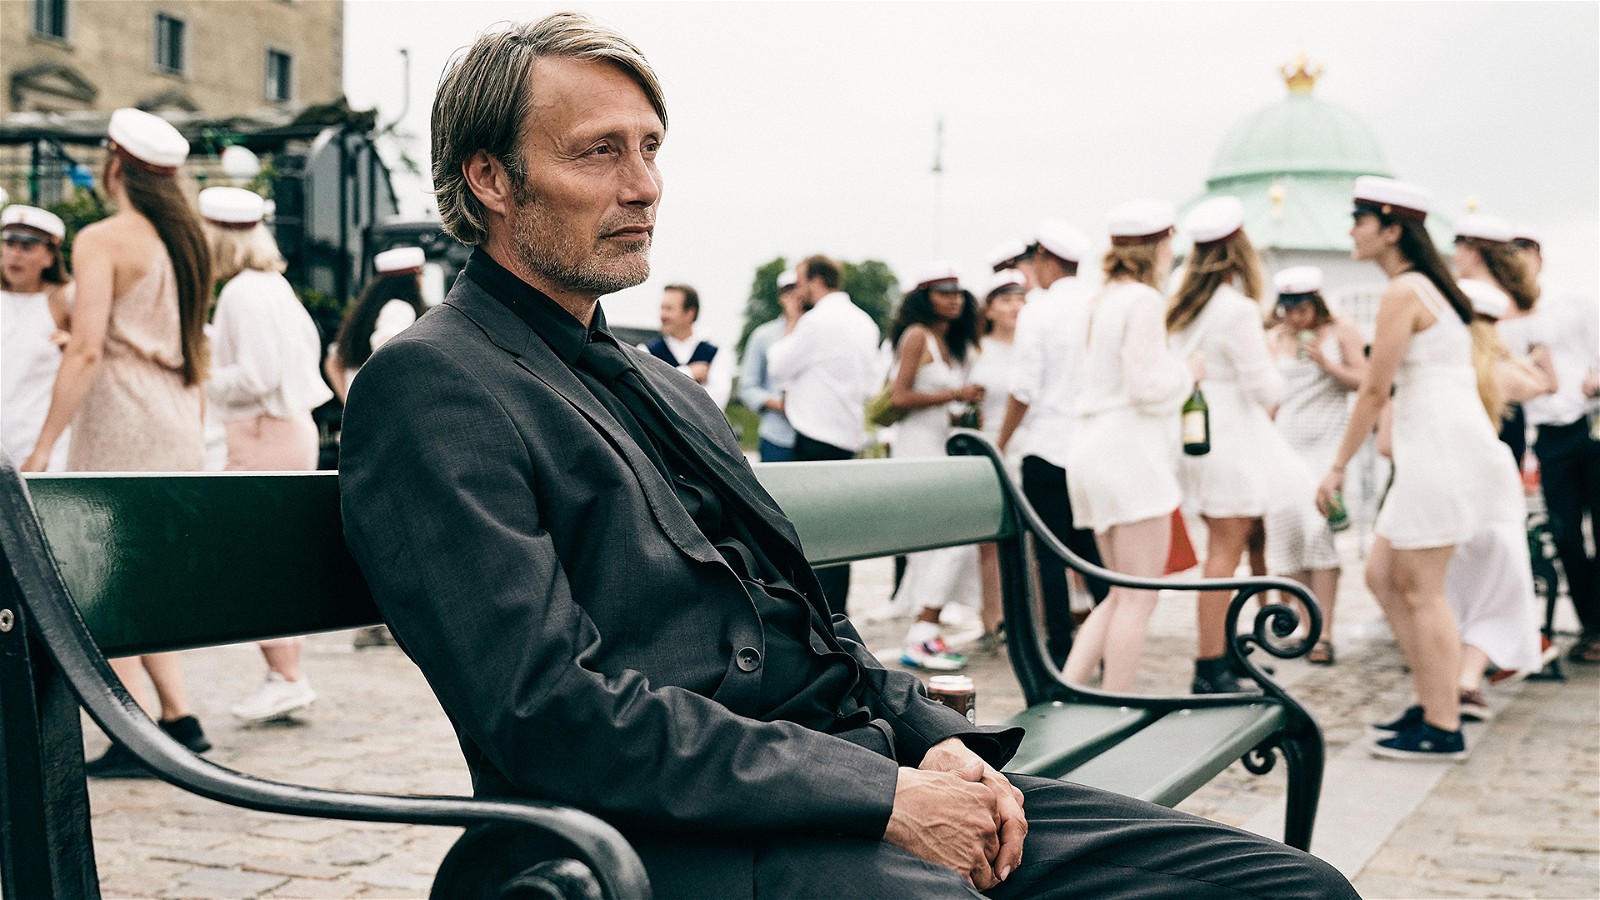 Mads Mikkelsen as Martin in Another Round